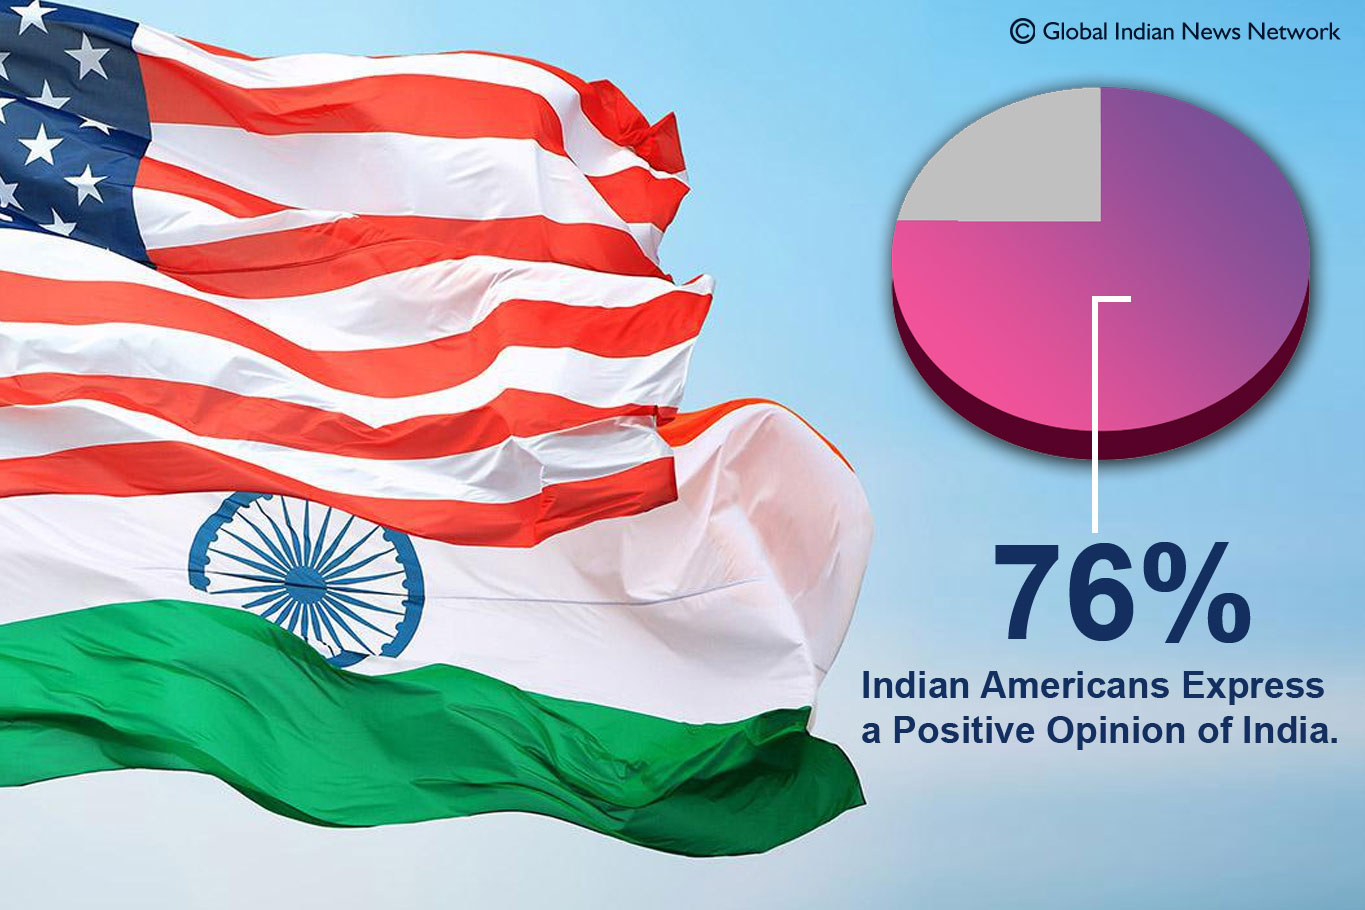 Approximately 76% of Indian Americans Express a Positive Opinion of India